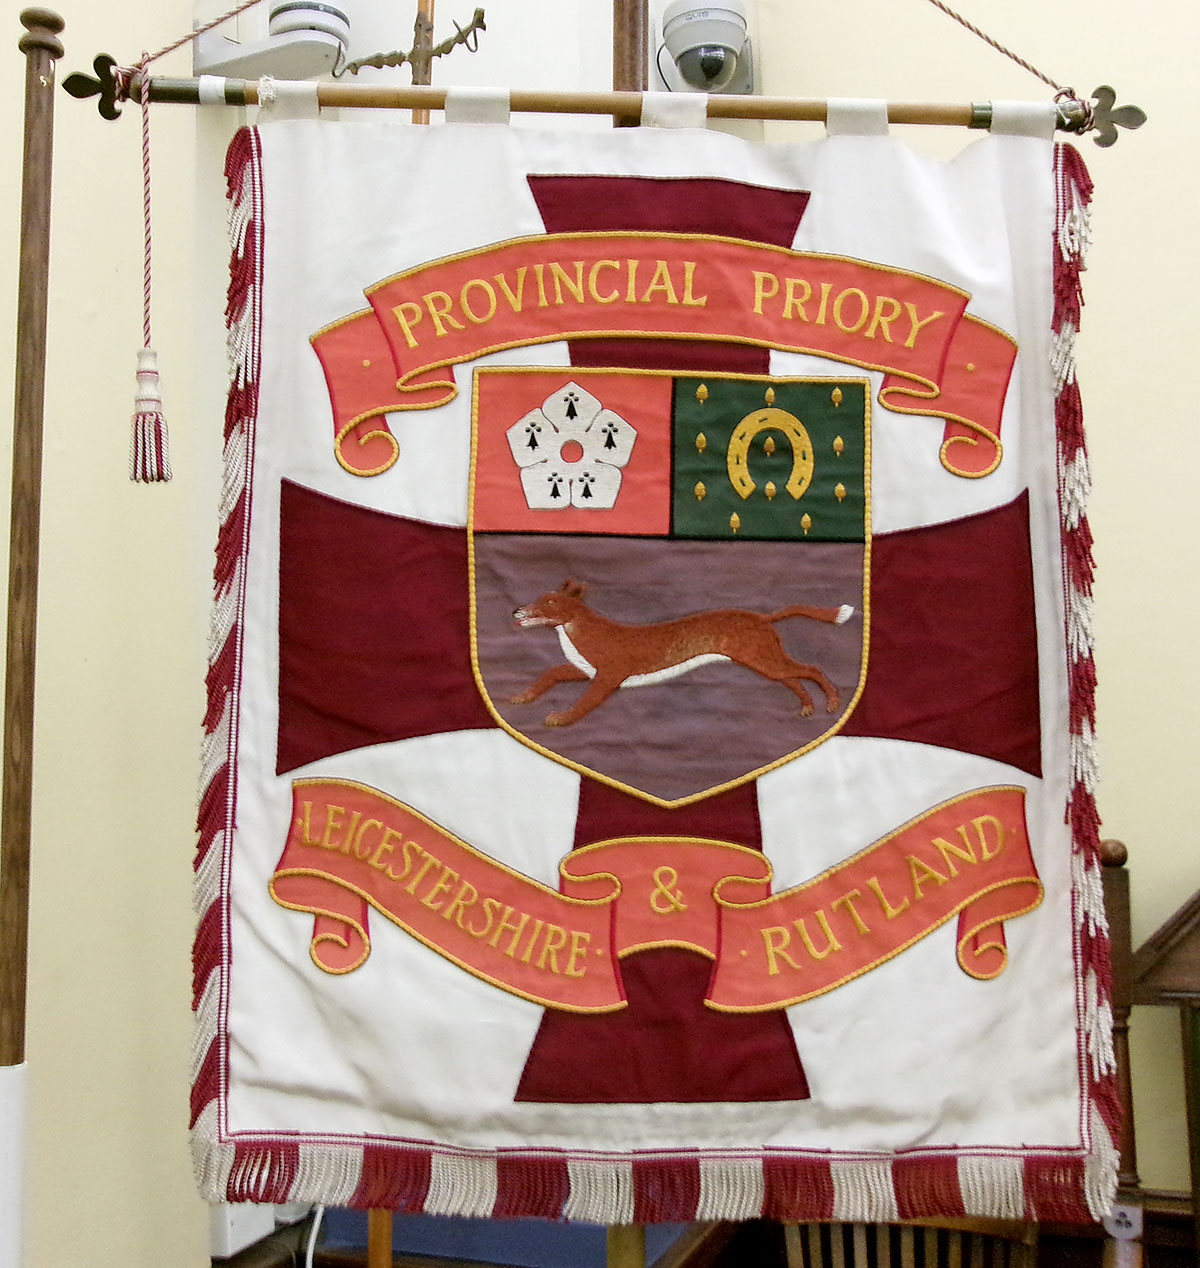 Kent represented at the Leicestershire and Rutland Provincial Priory meeting